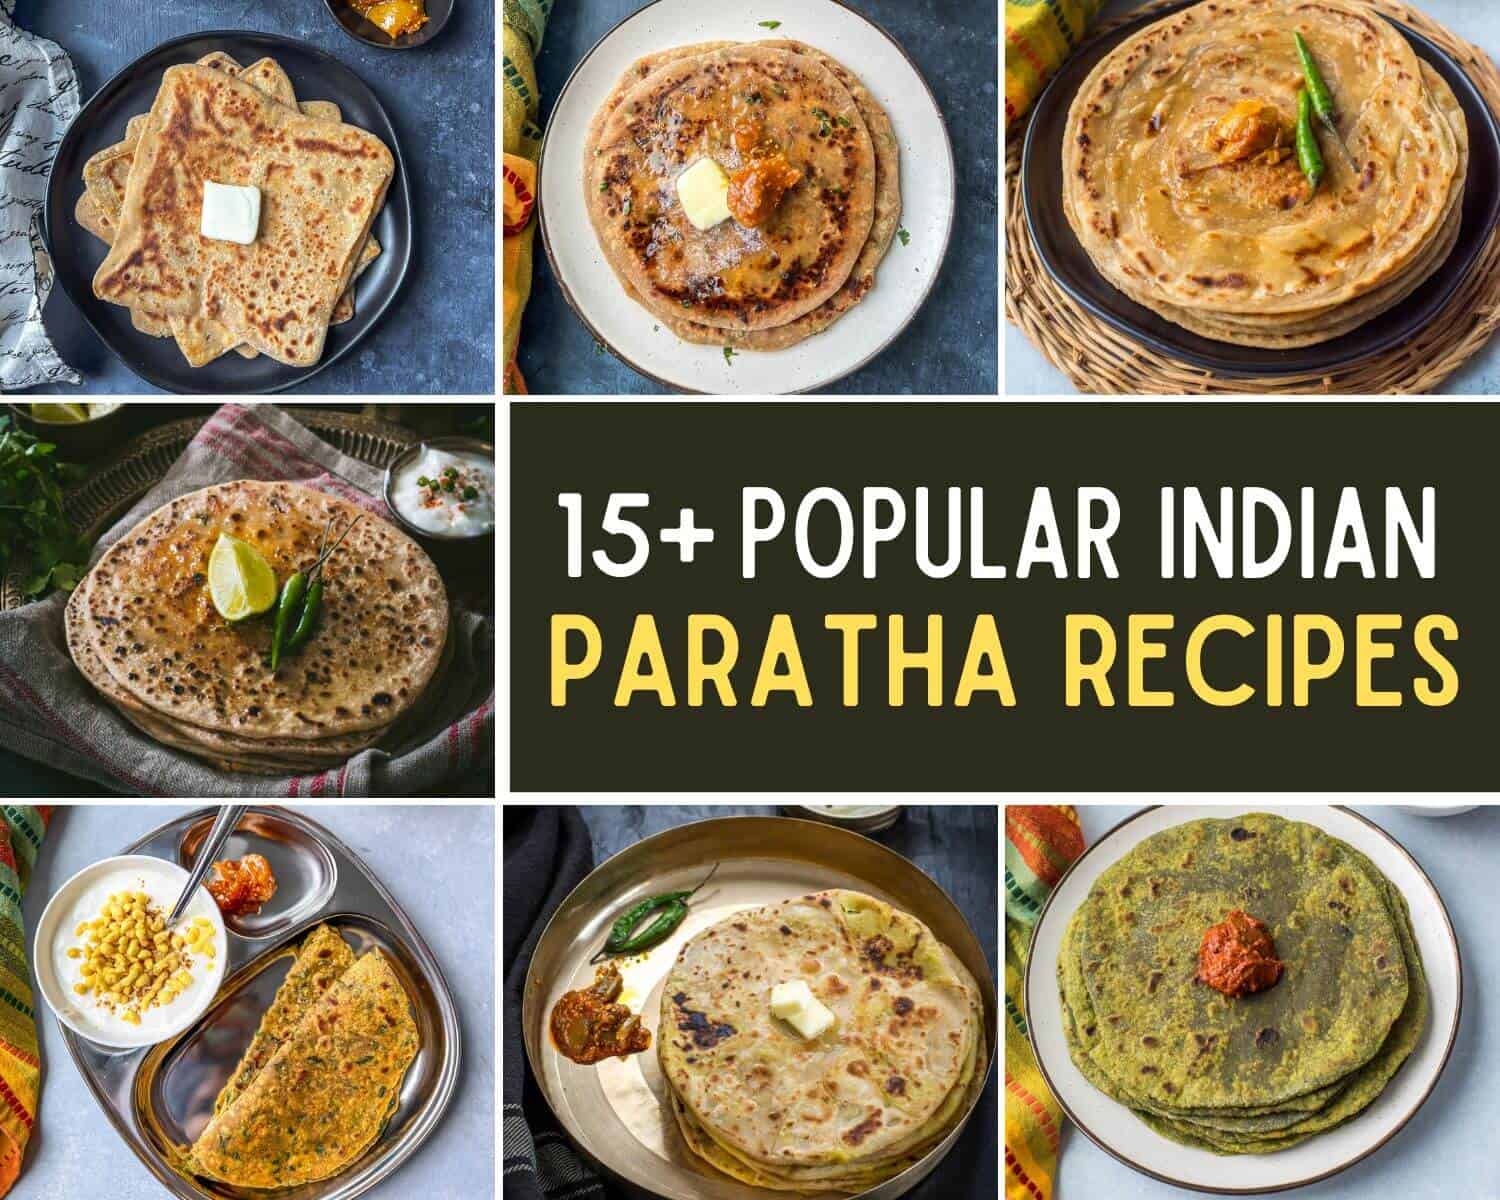 A collage of 7 images with caption 15+ Popular Indian Paratha Recipes